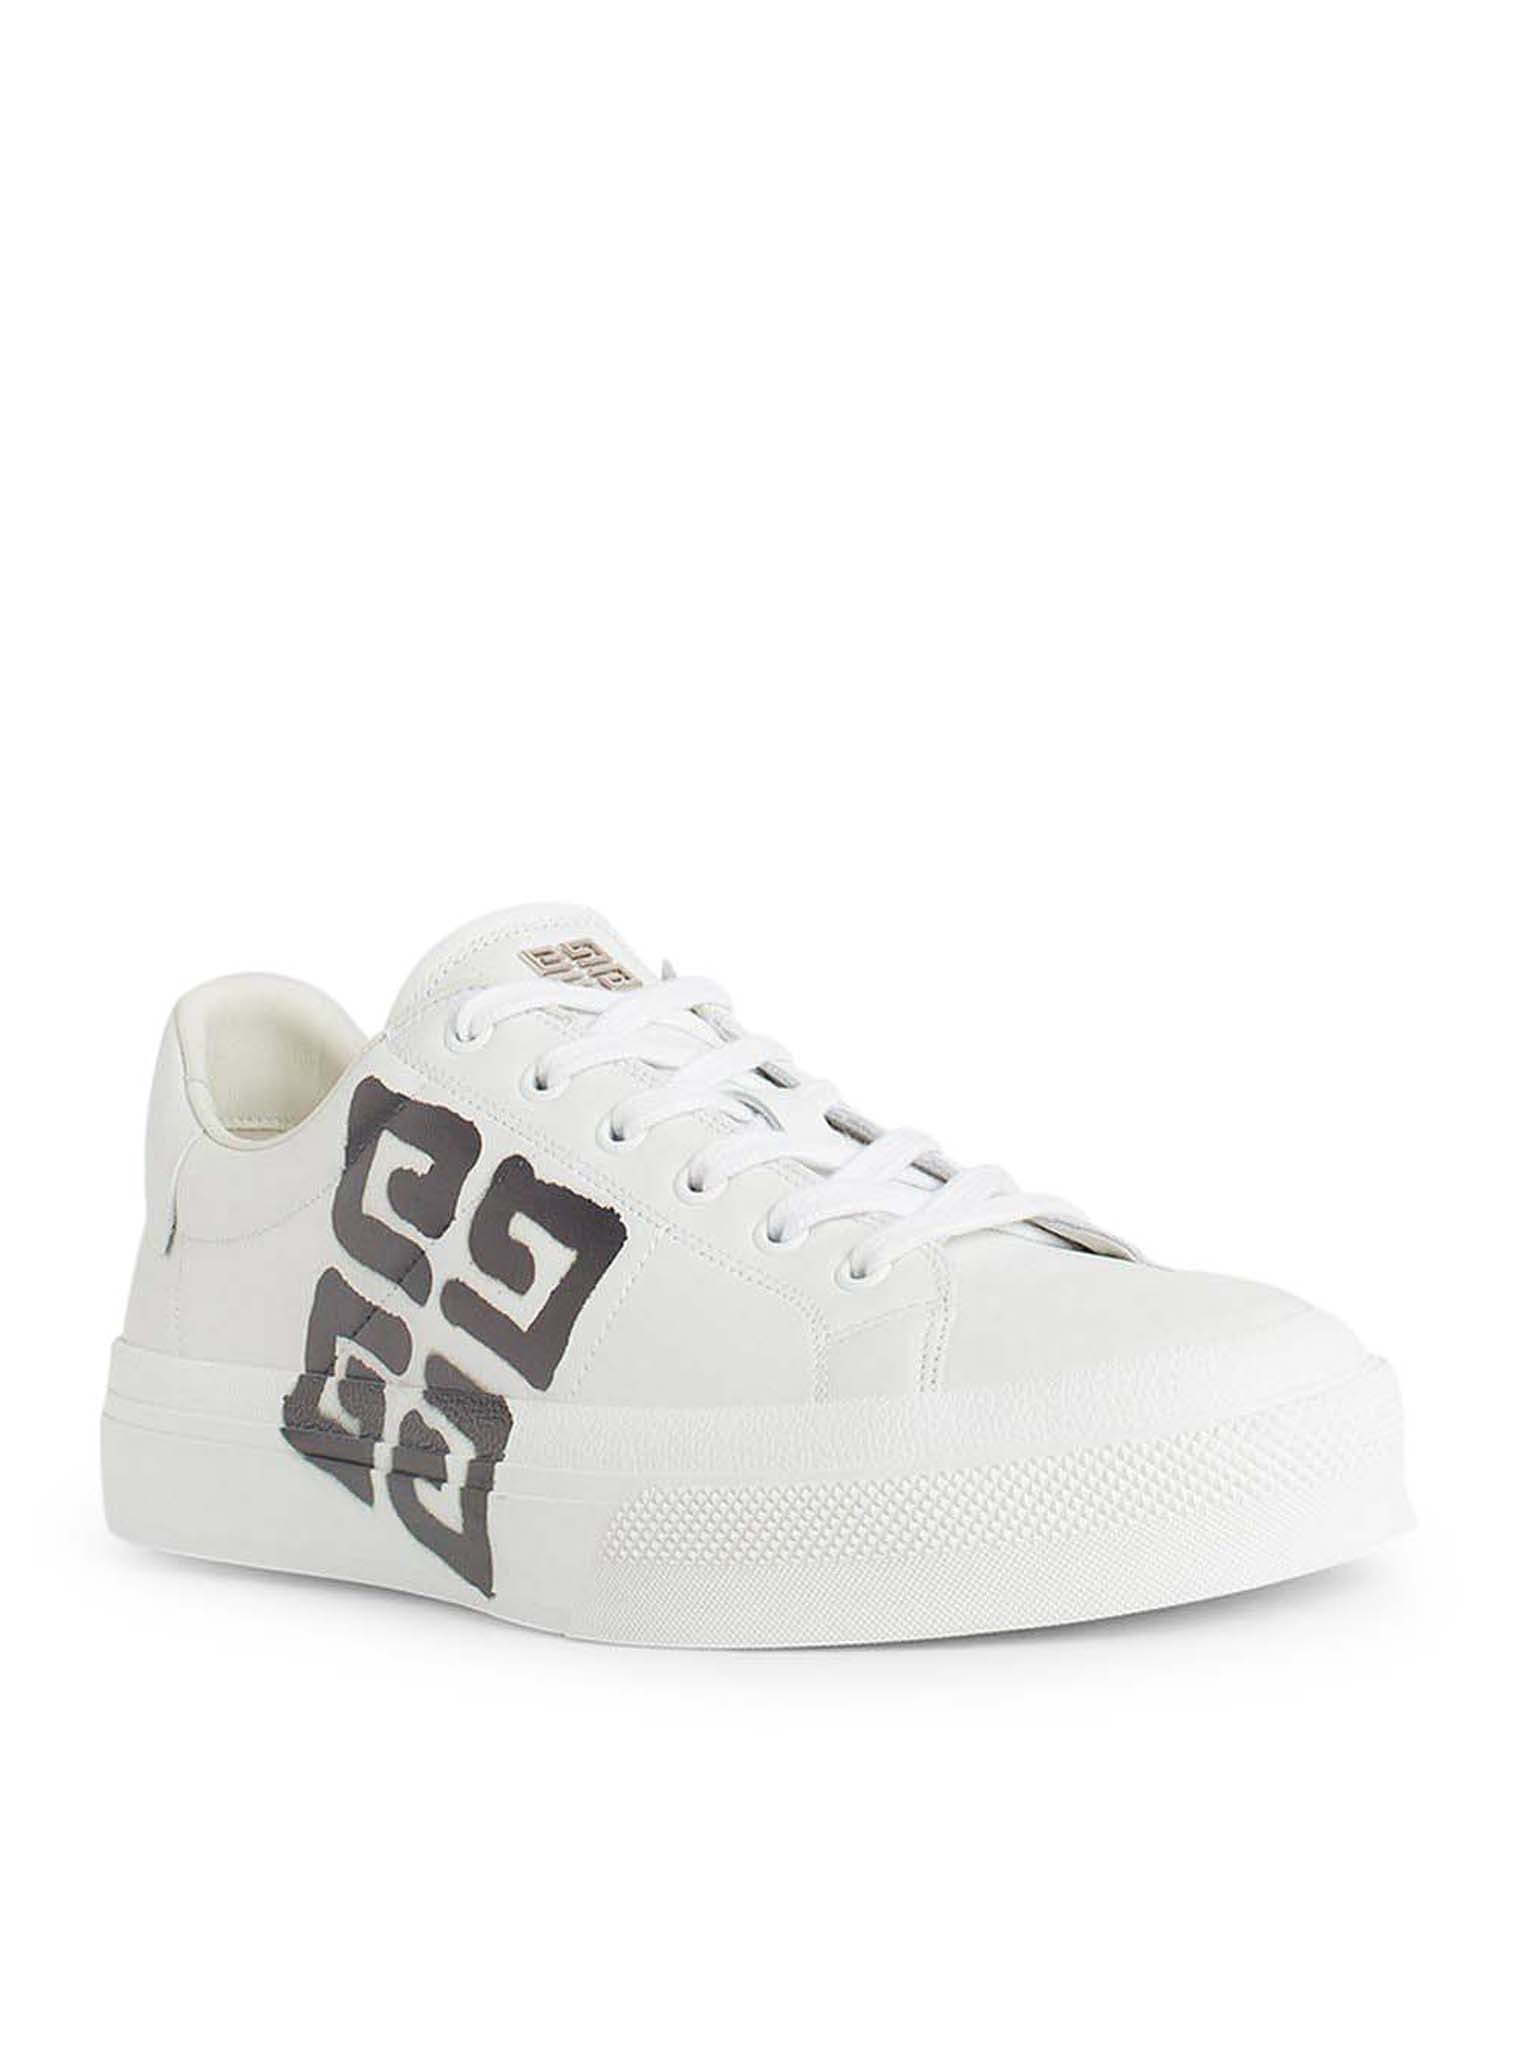 City sport sneakers in leather with graffiti-effect 4G print